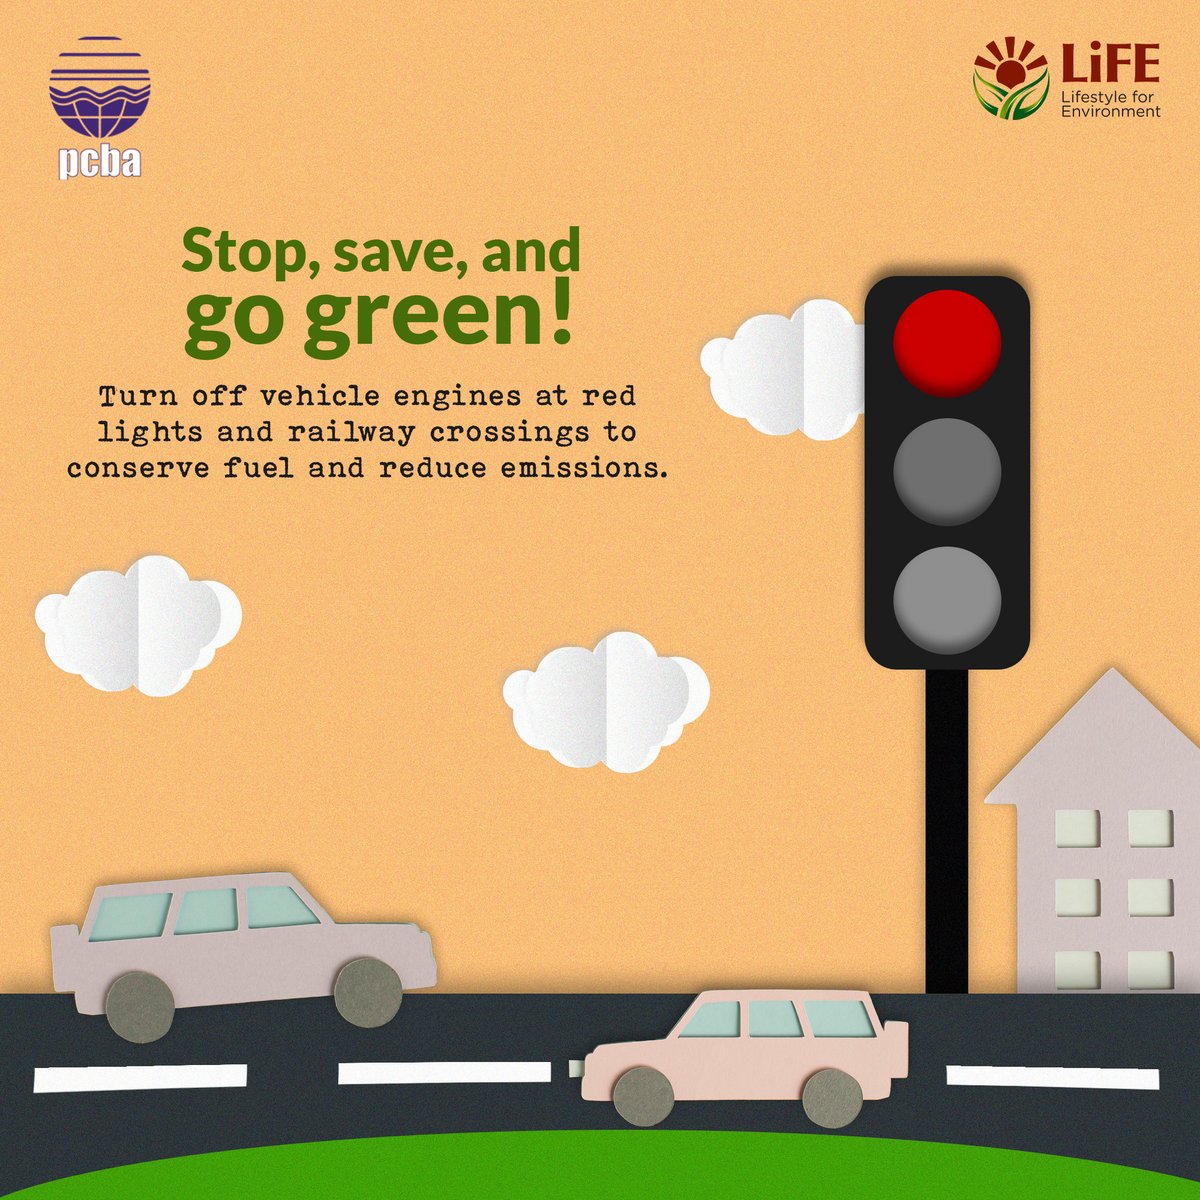 Stop, save, and go green!

Turn off vehicle engines at red lights and railway crossings to conserve fuel and reduce emissions.

#GoGreen #ReduceEmissions #SustainableTomorrow